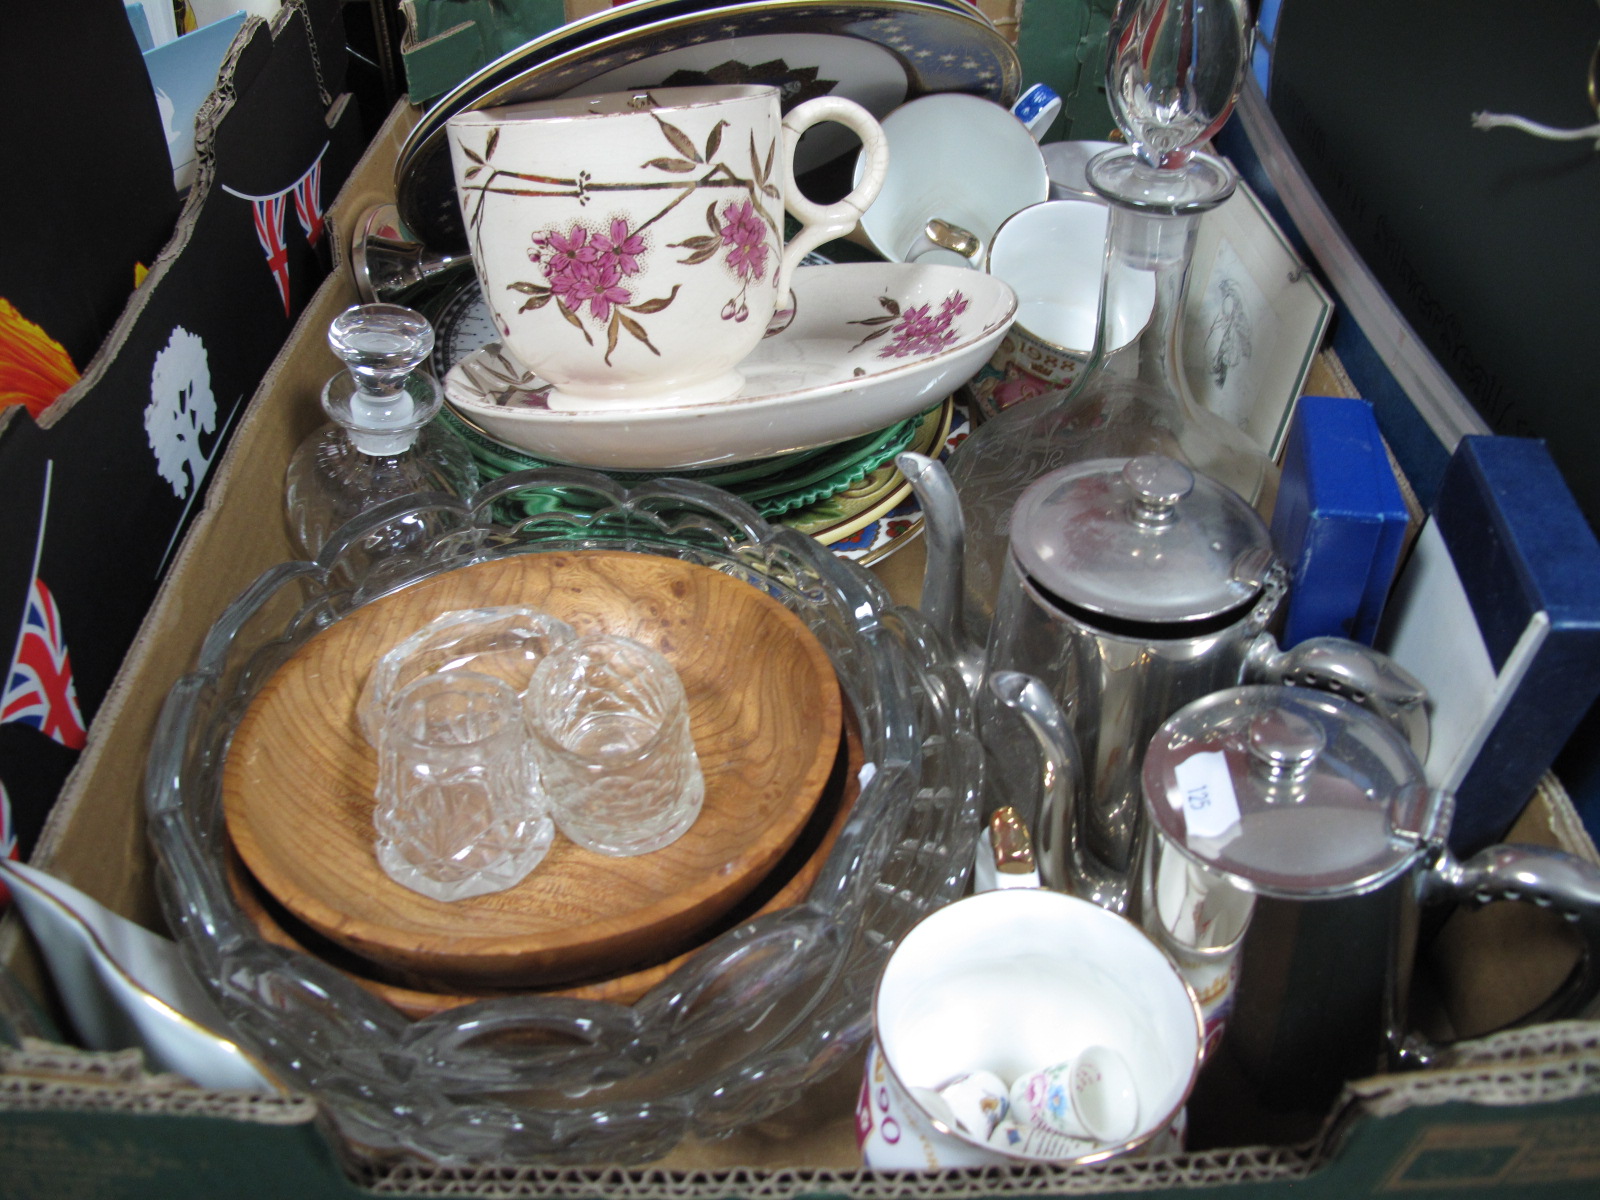 A Spode Millennium Achievements Plate, green leaf plates, breakfast cup and saucer, commemorative